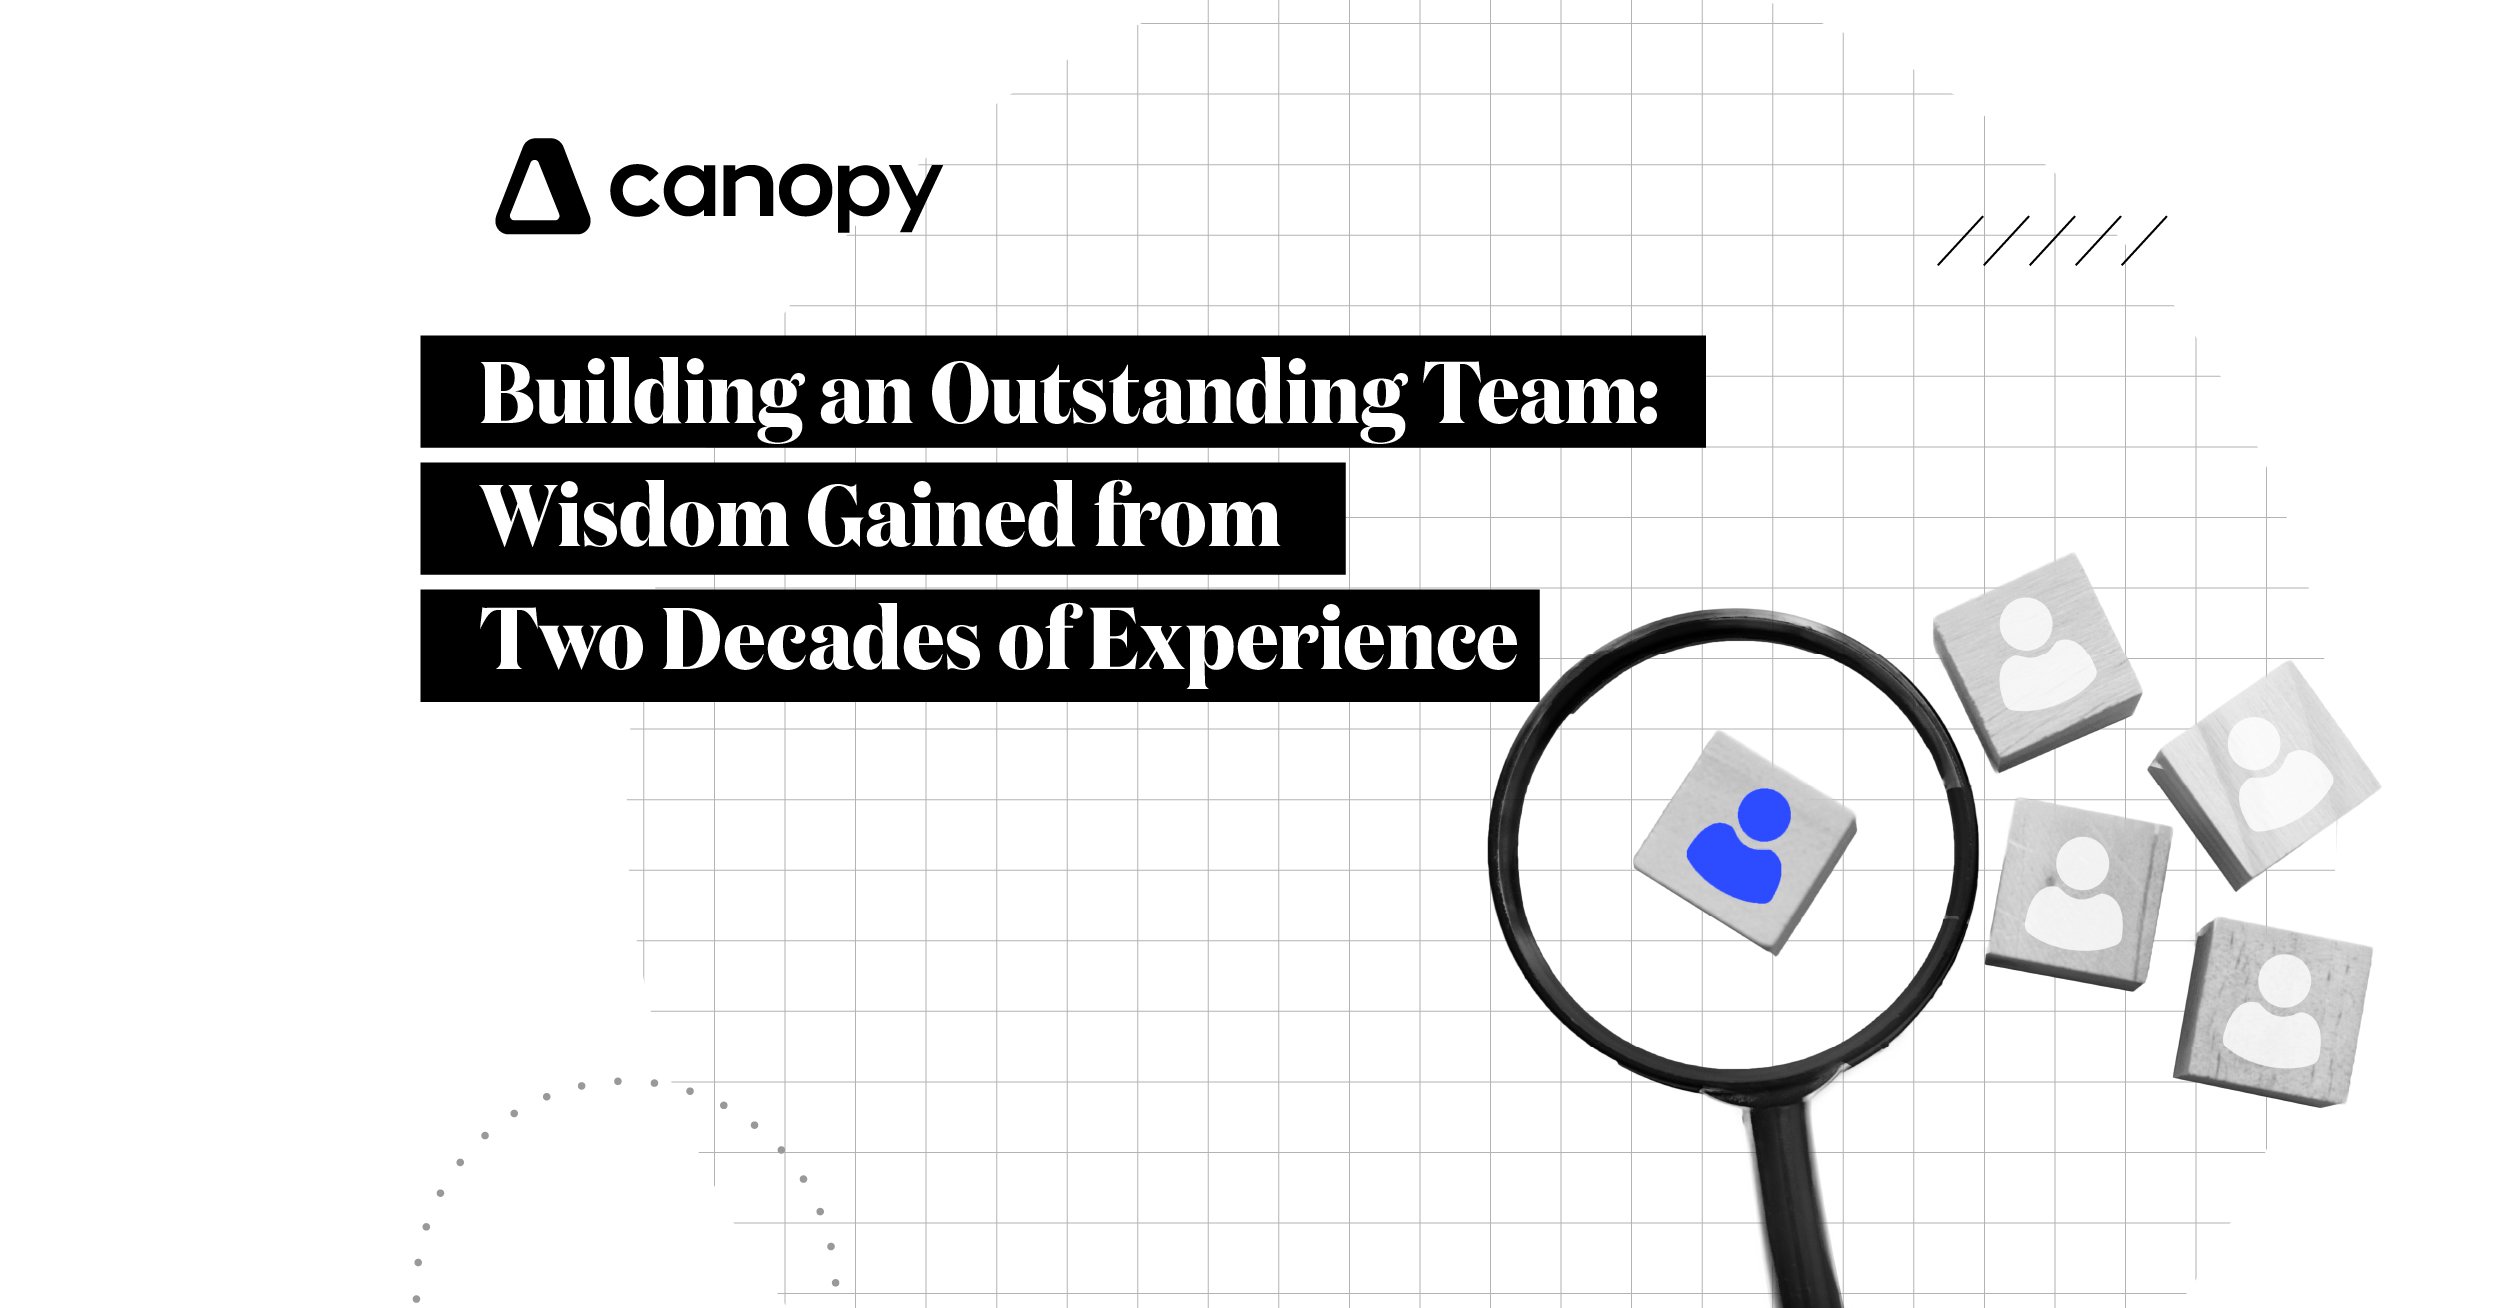 Building an Outstanding Team: Wisdom Gained from Two Decades of Experience